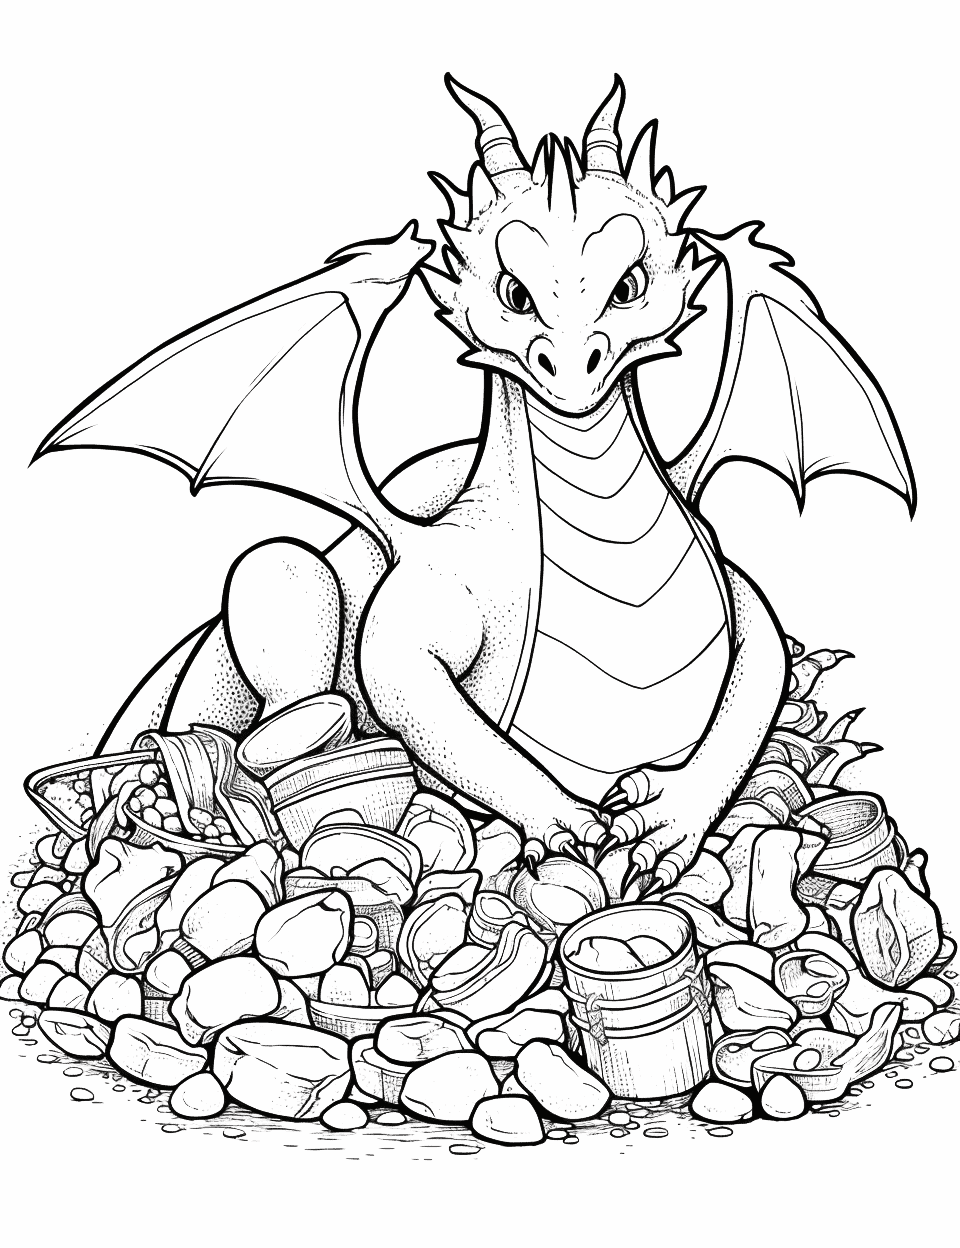 Dragon's Treasure Coloring Page - A dragon protectively huddled over its hoard of treasure.